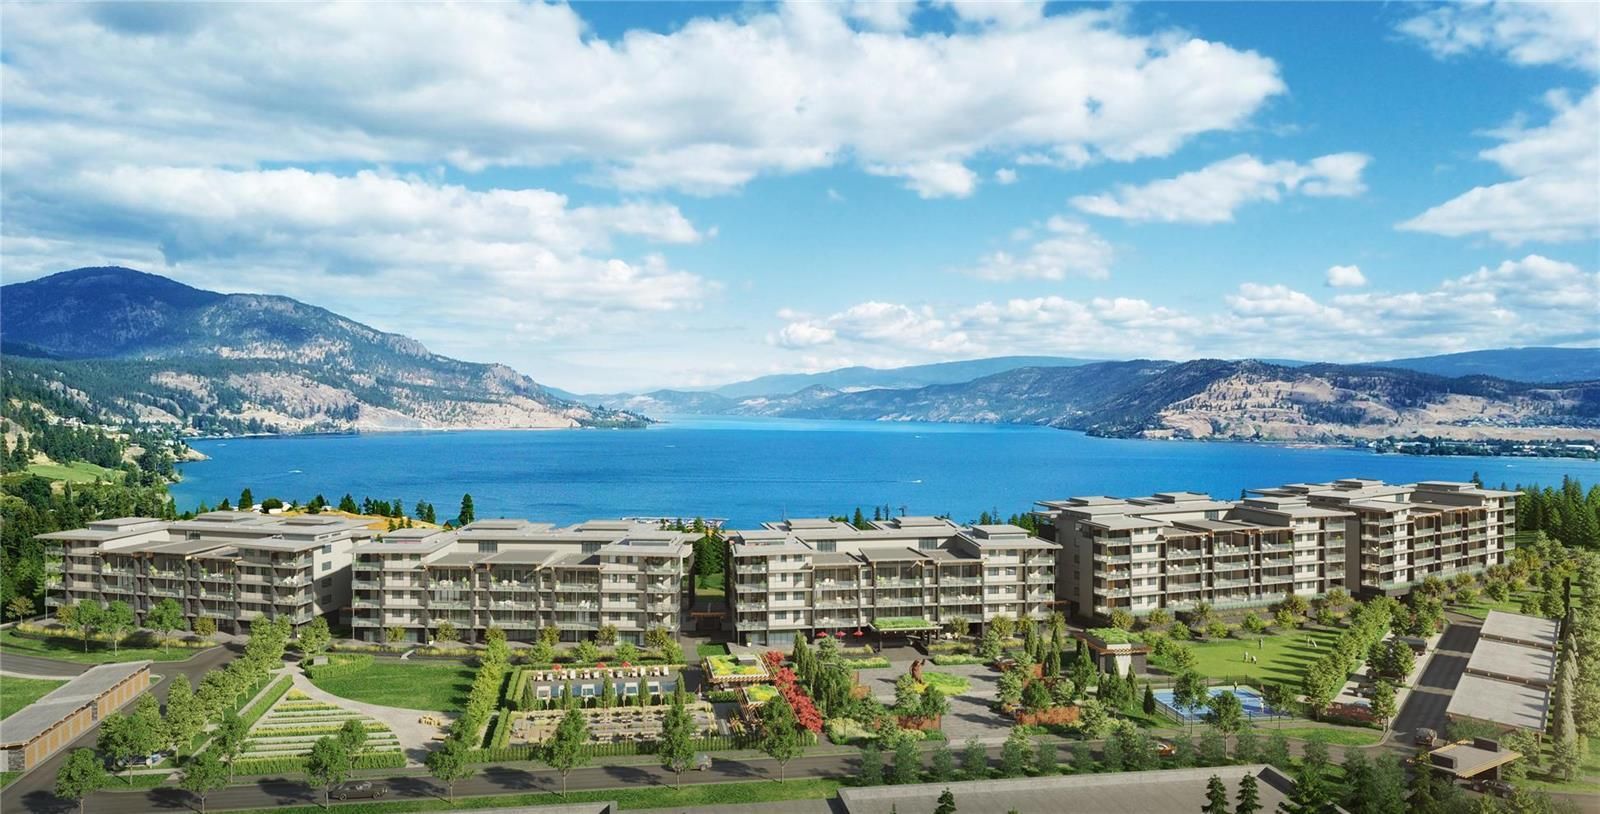 Main Photo: #103 1170 Old Ferry Wharf Road, in West Kelowna: Condo for sale : MLS®# 10264227